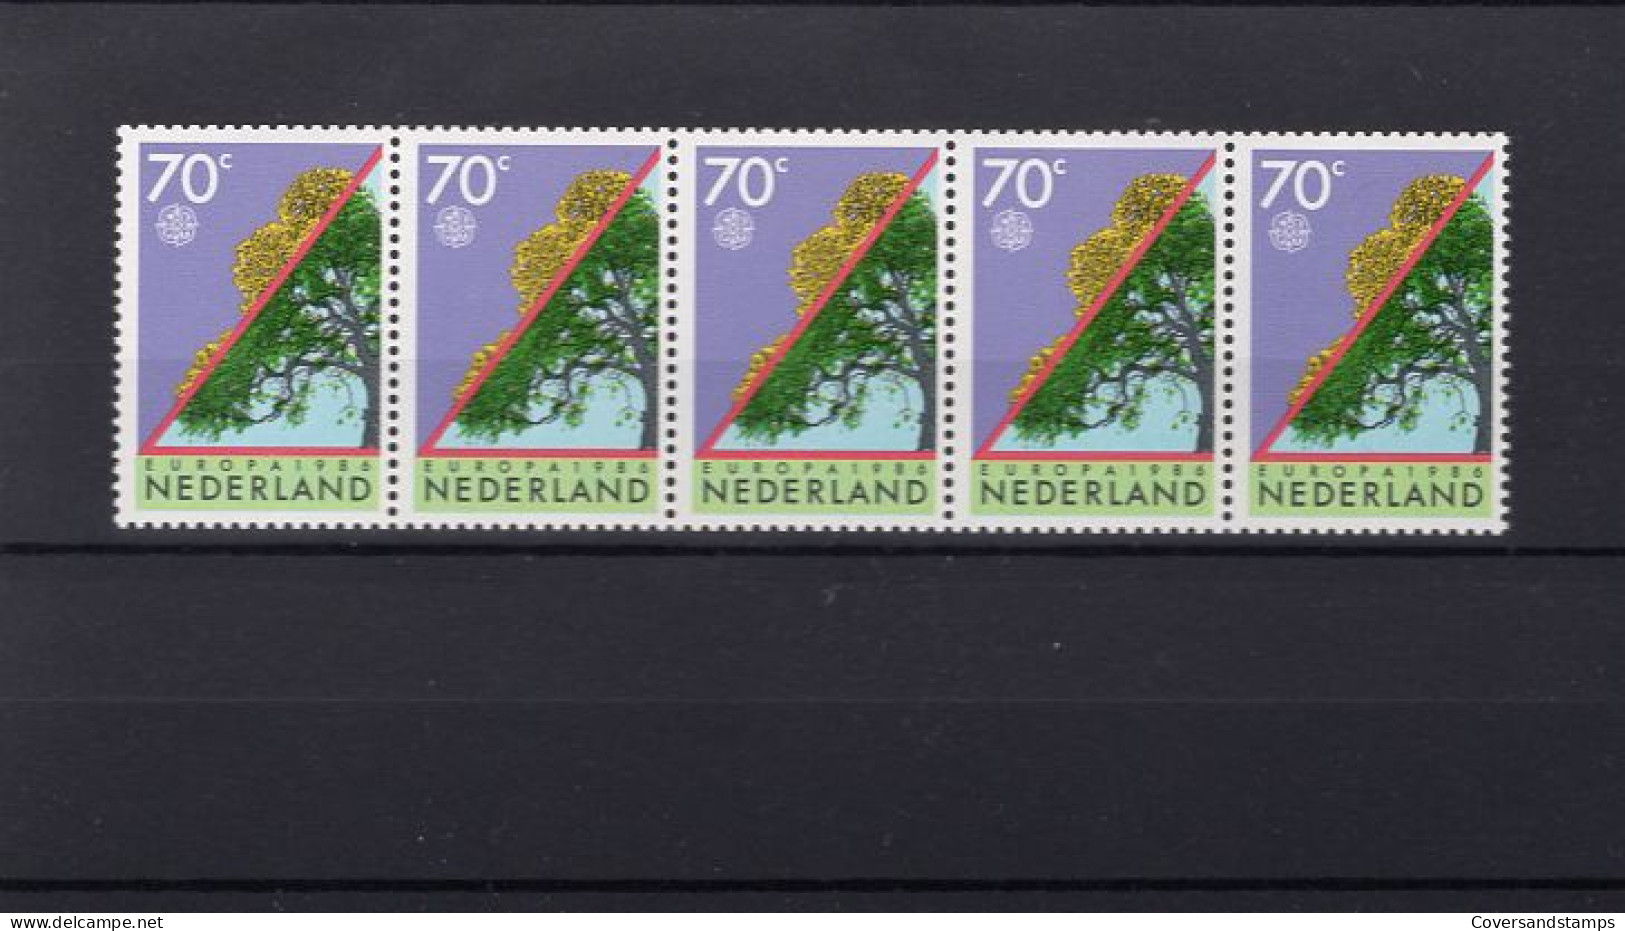  Netherlands - NVPH 1354 In Strips Of 5, Number 00200  ** MNH - 1986